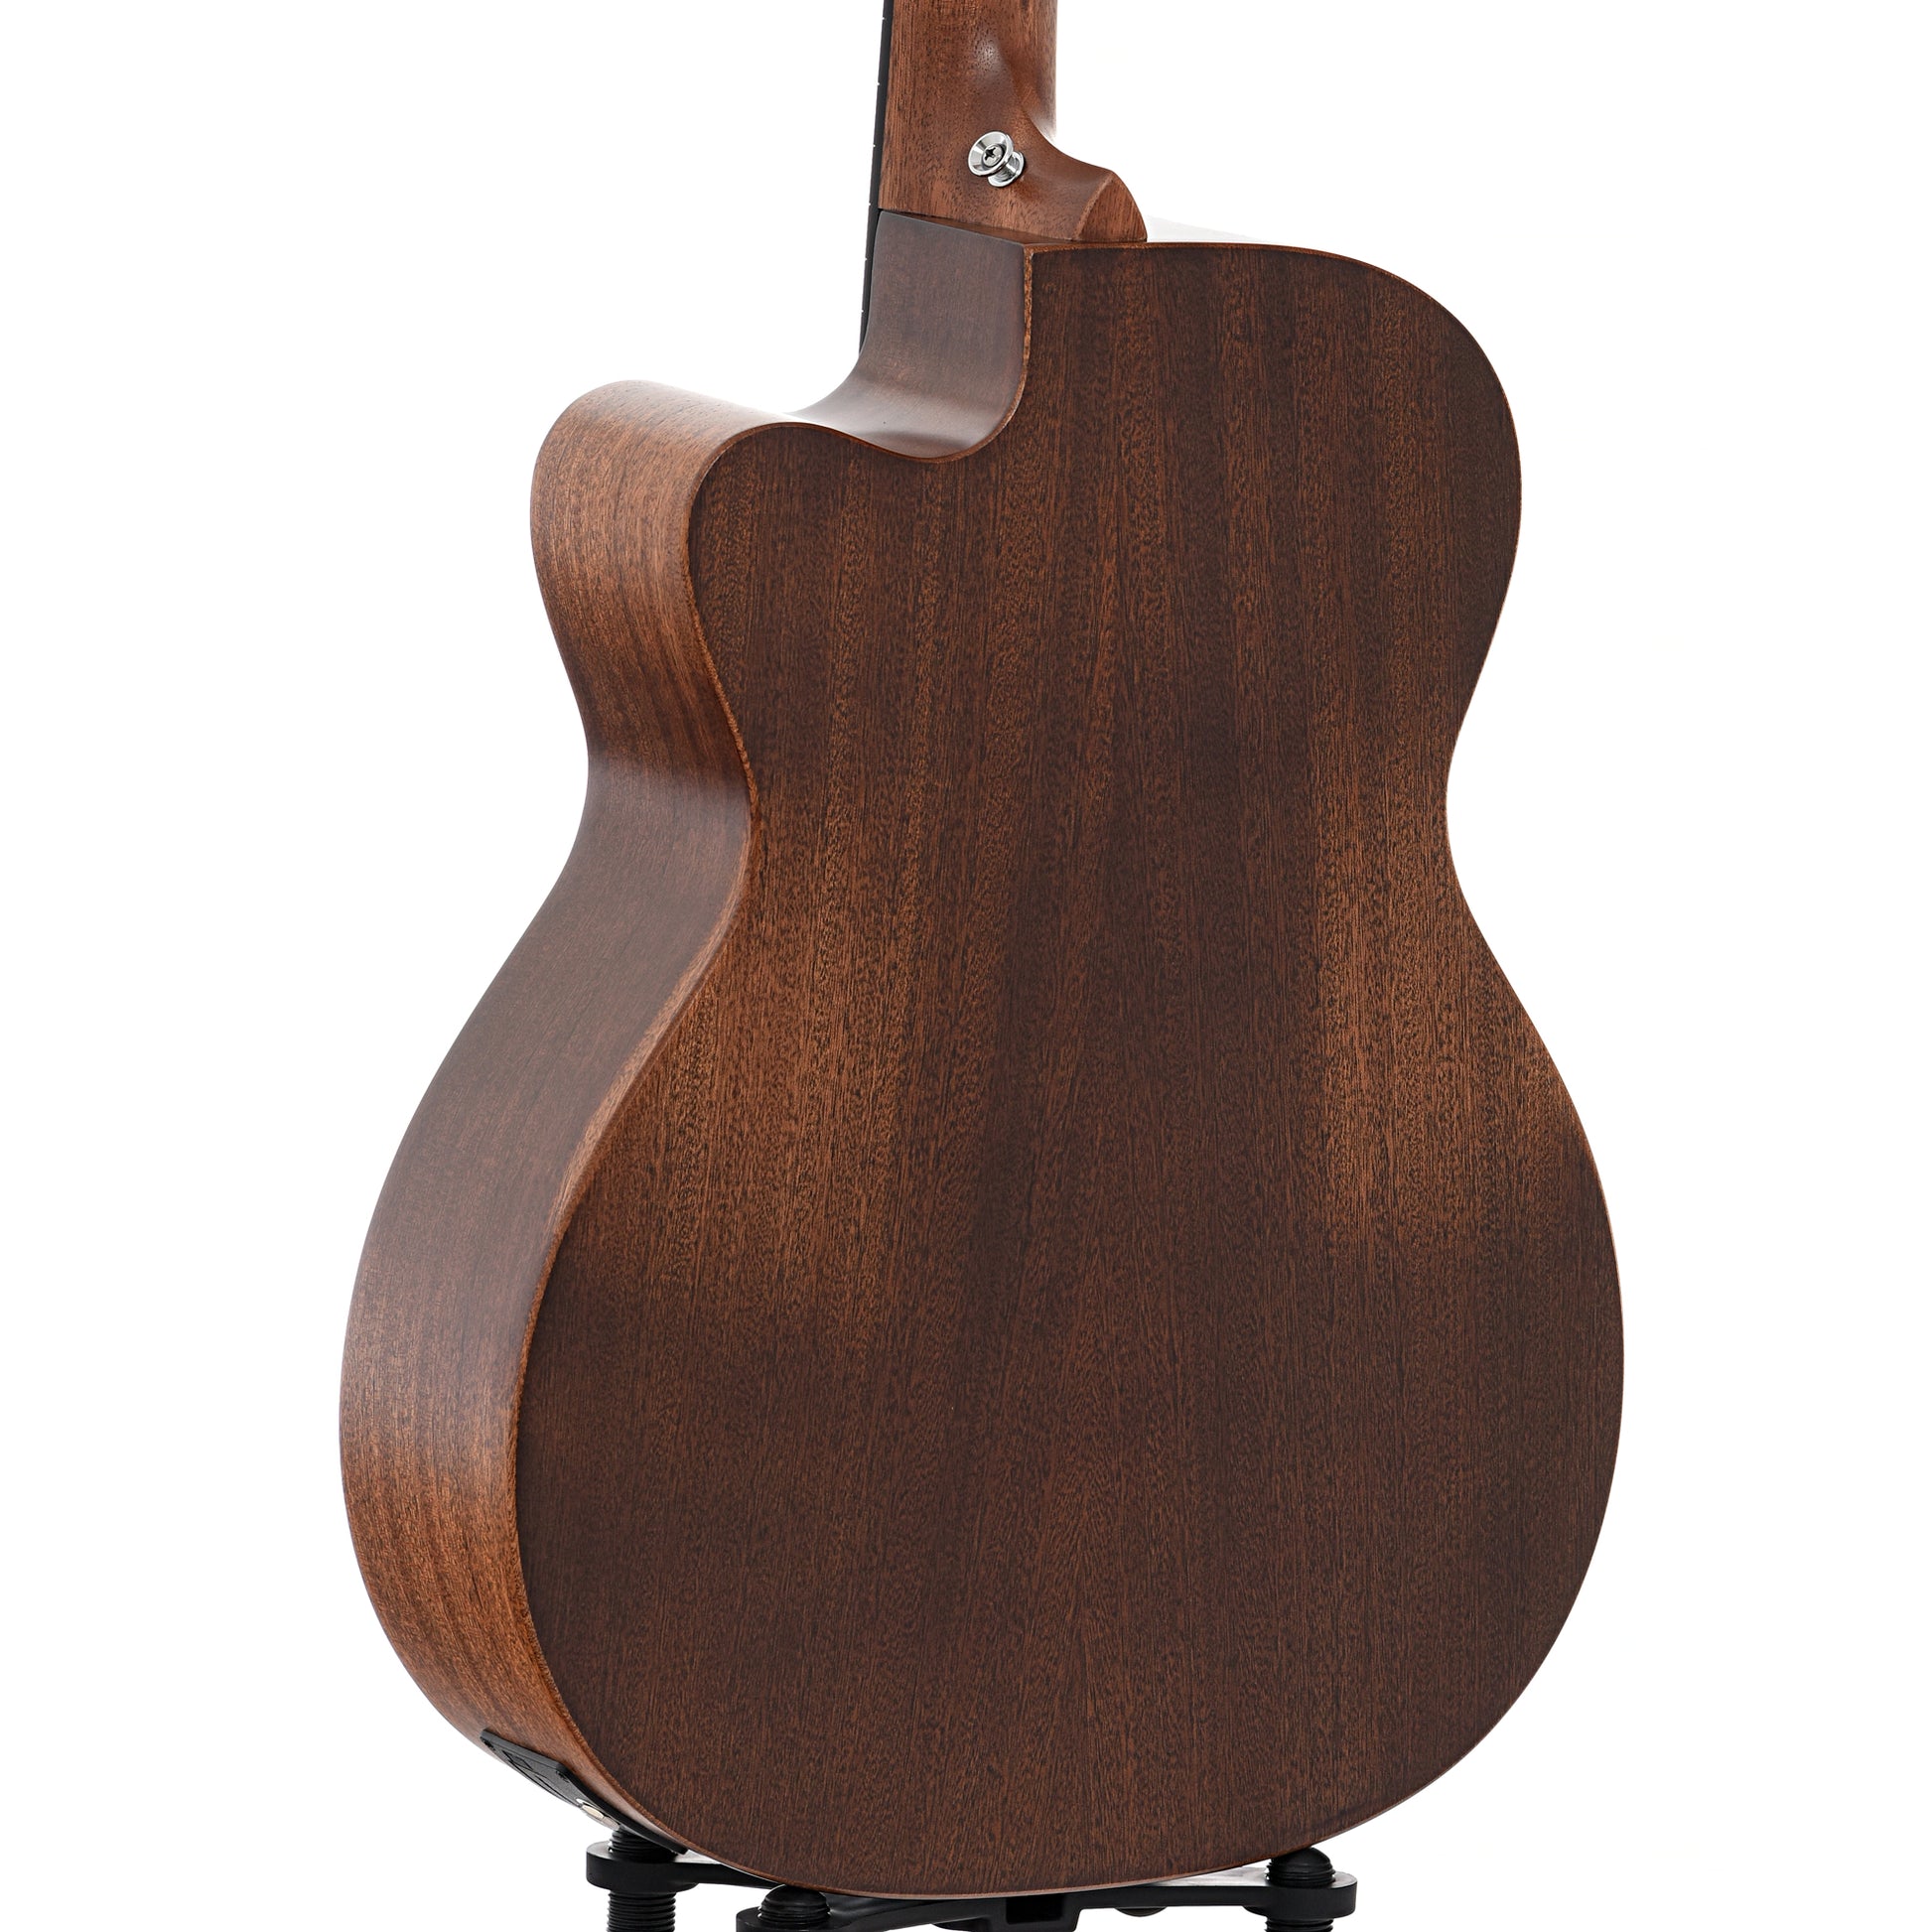 Back and side of Martin 000CJR-10E StreetMaster